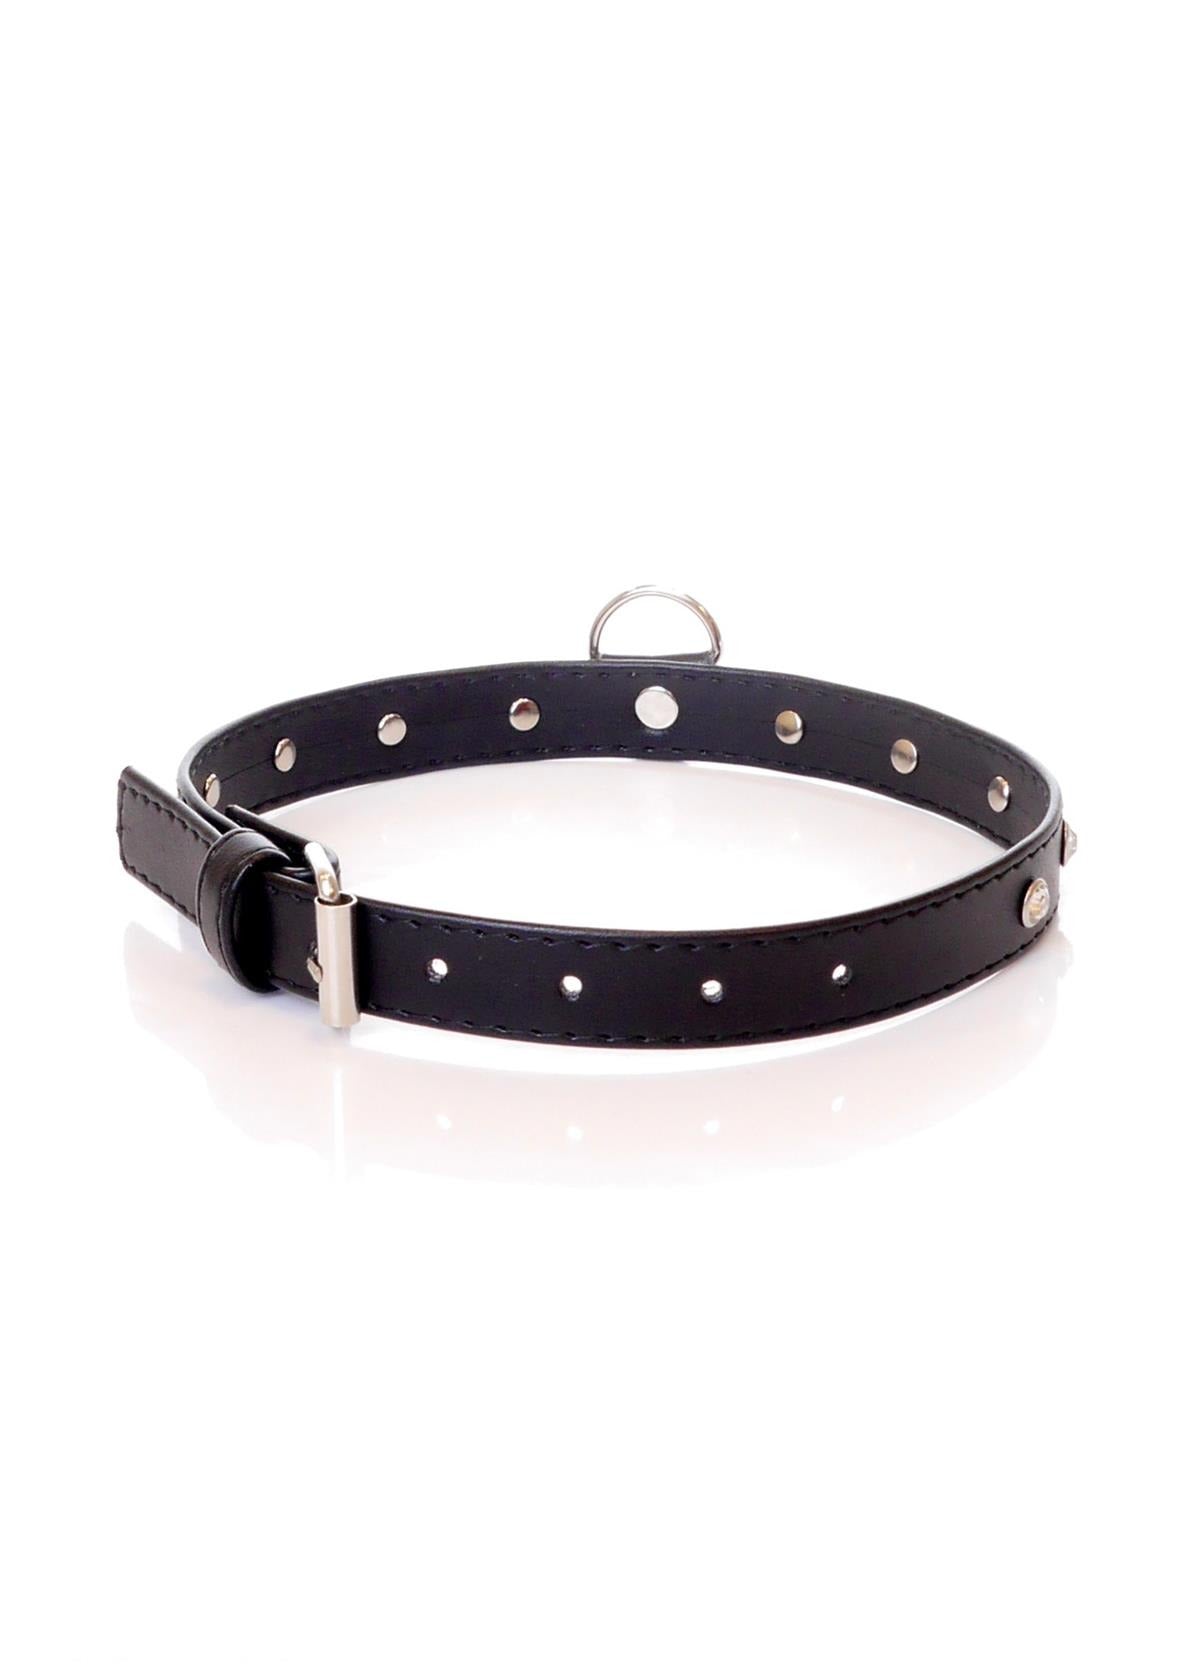 Bossoftoys - 33-00117 - Fetish Collar Silver with stones - 2 cm width - Silver line adjustable - easy to hang - with product tag /barcode